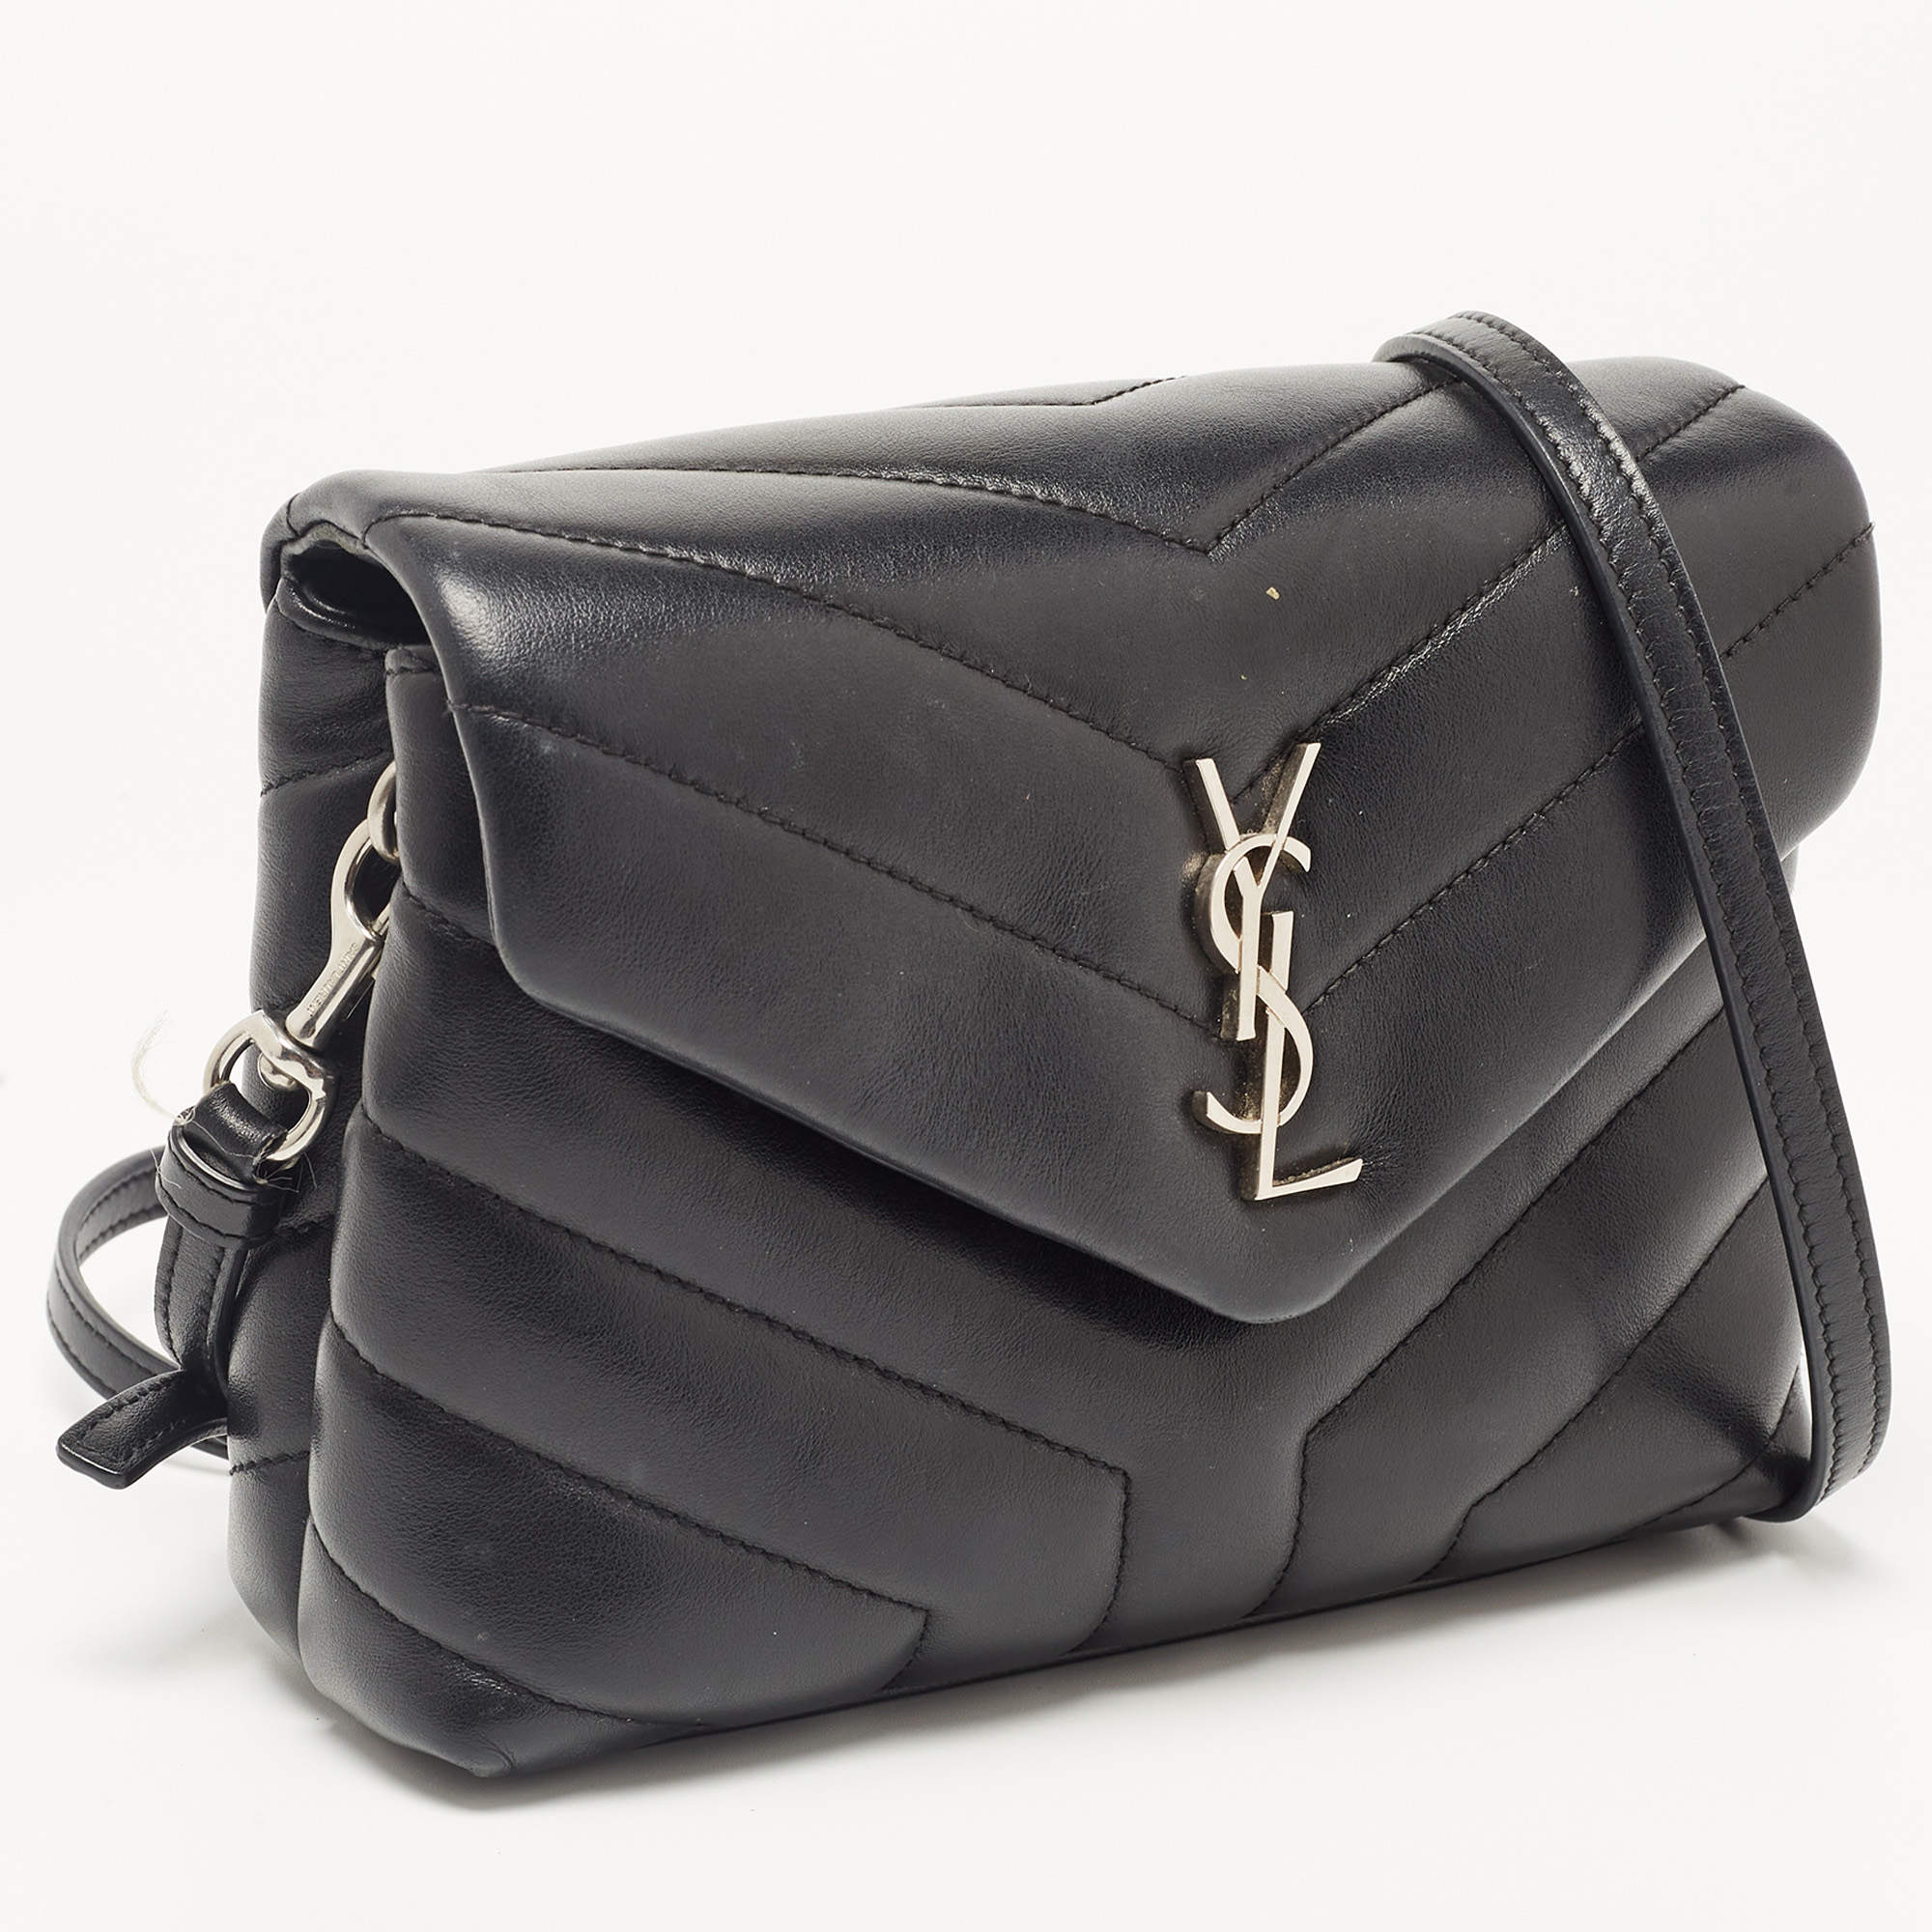 Loulou leather crossbody bag Saint Laurent Black in Leather - 33434378